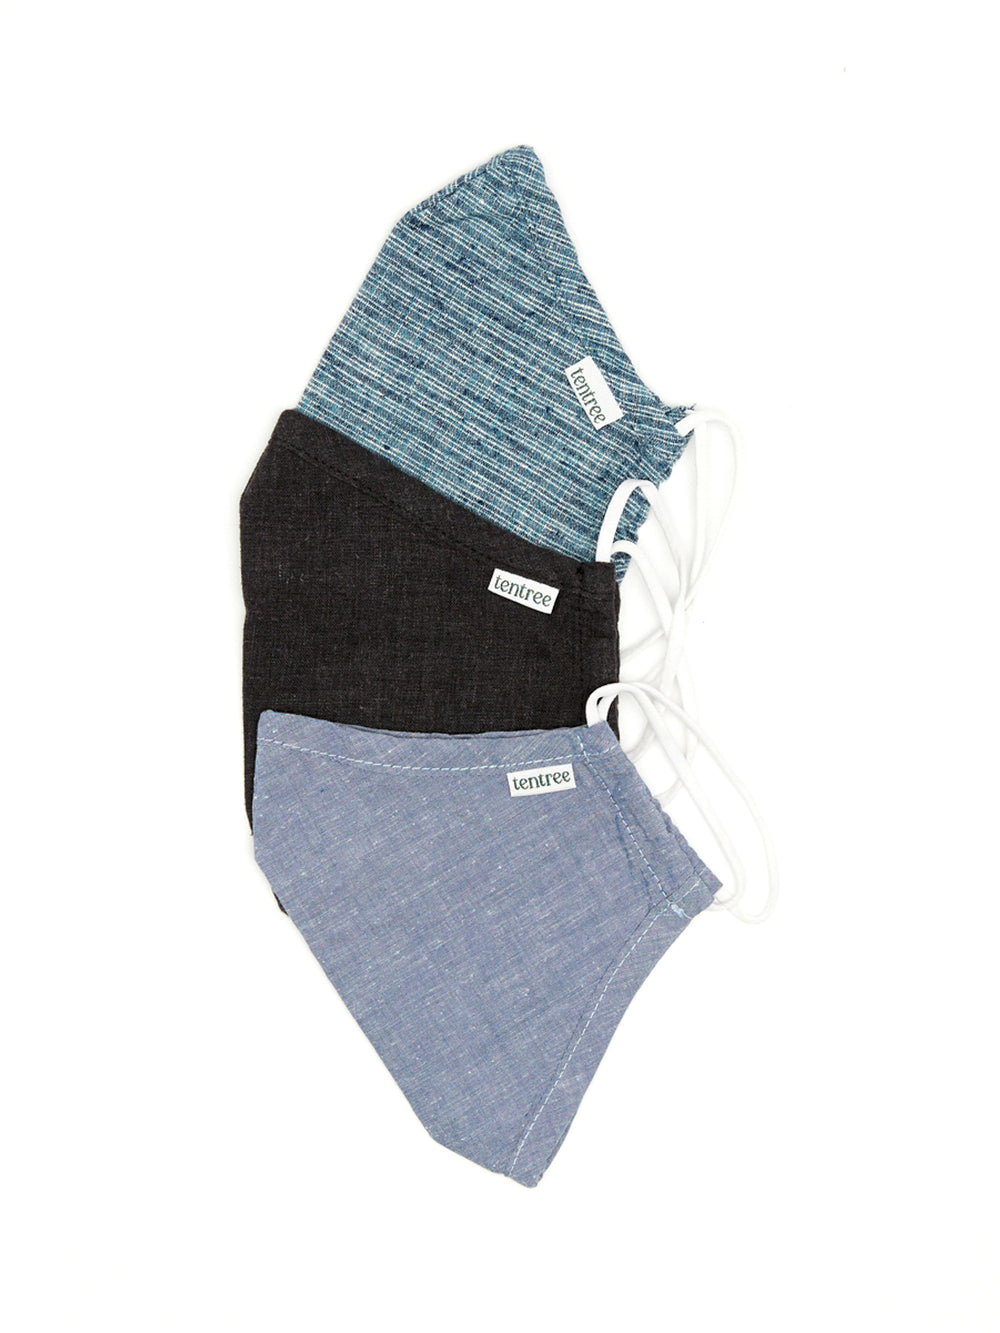 TENTREE THE PROTECT MASK 3 PACK - MULTI - DESTOCKAGE